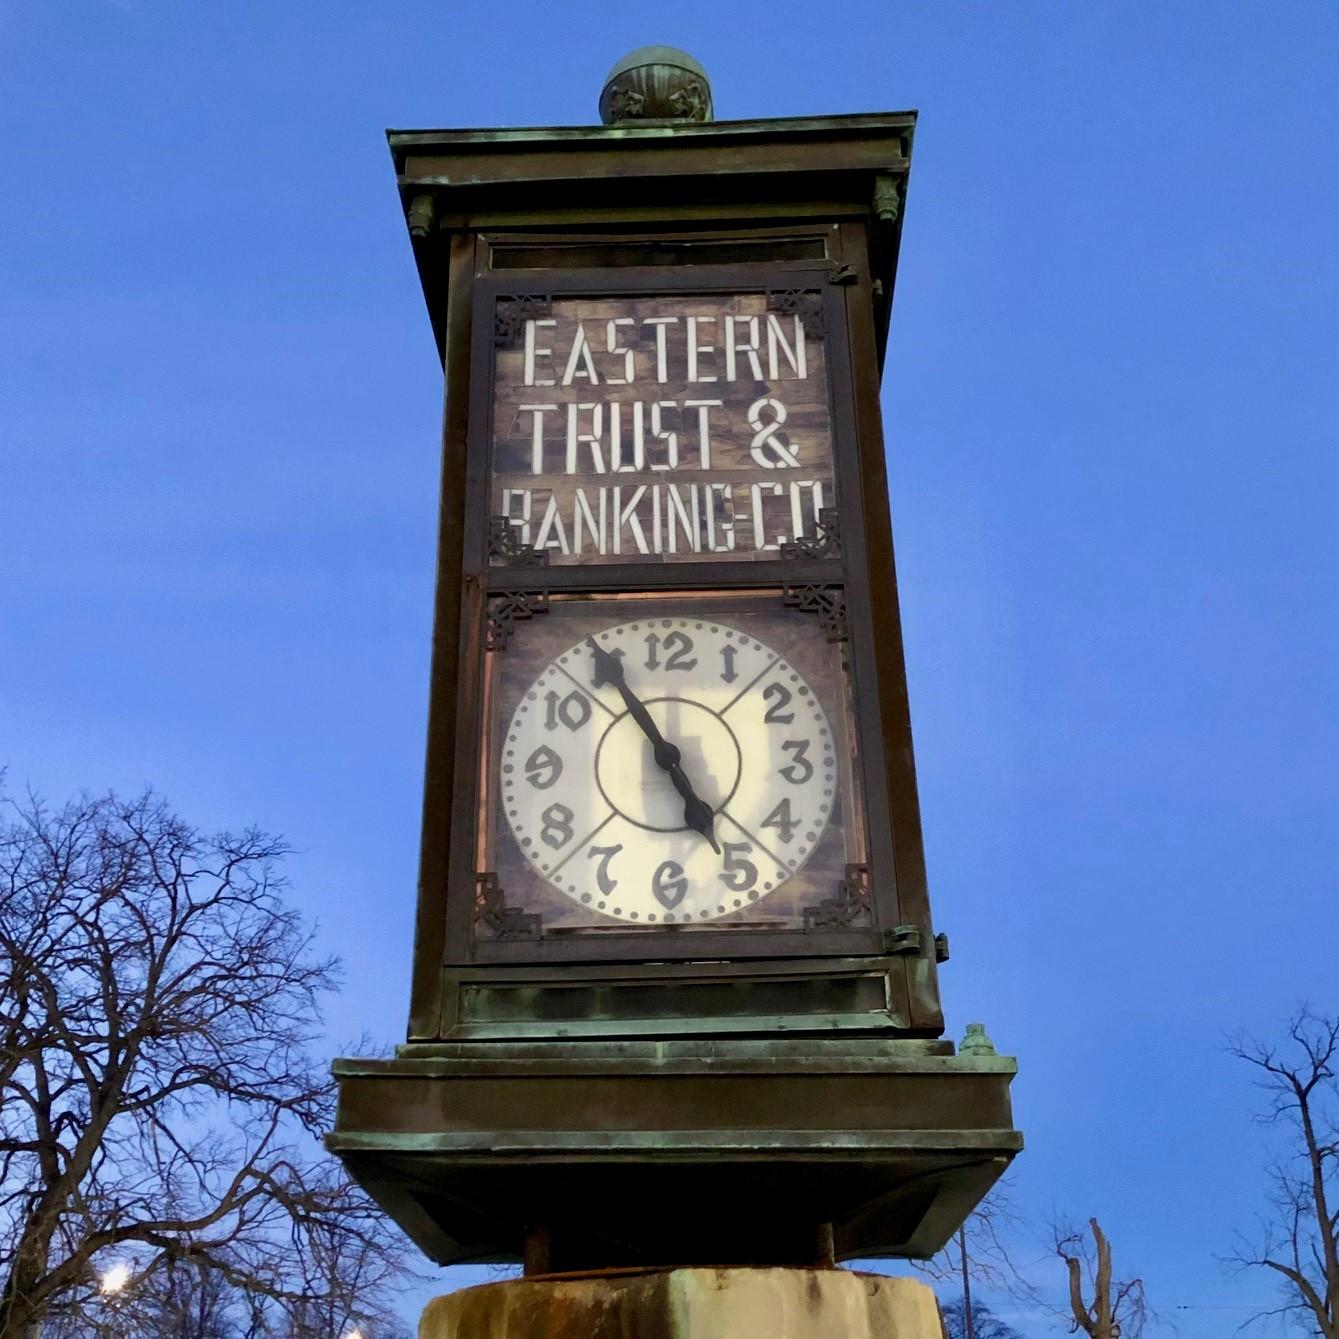 We have an amazing four sided outdoor street clock that came off the Eastern Trust & Banking Company Building on State street in Bangor, Maine. It was made by Adolf Pfaff who operated W.F. Weeks local jeweler and watchmaker in downtown Bangor Maine